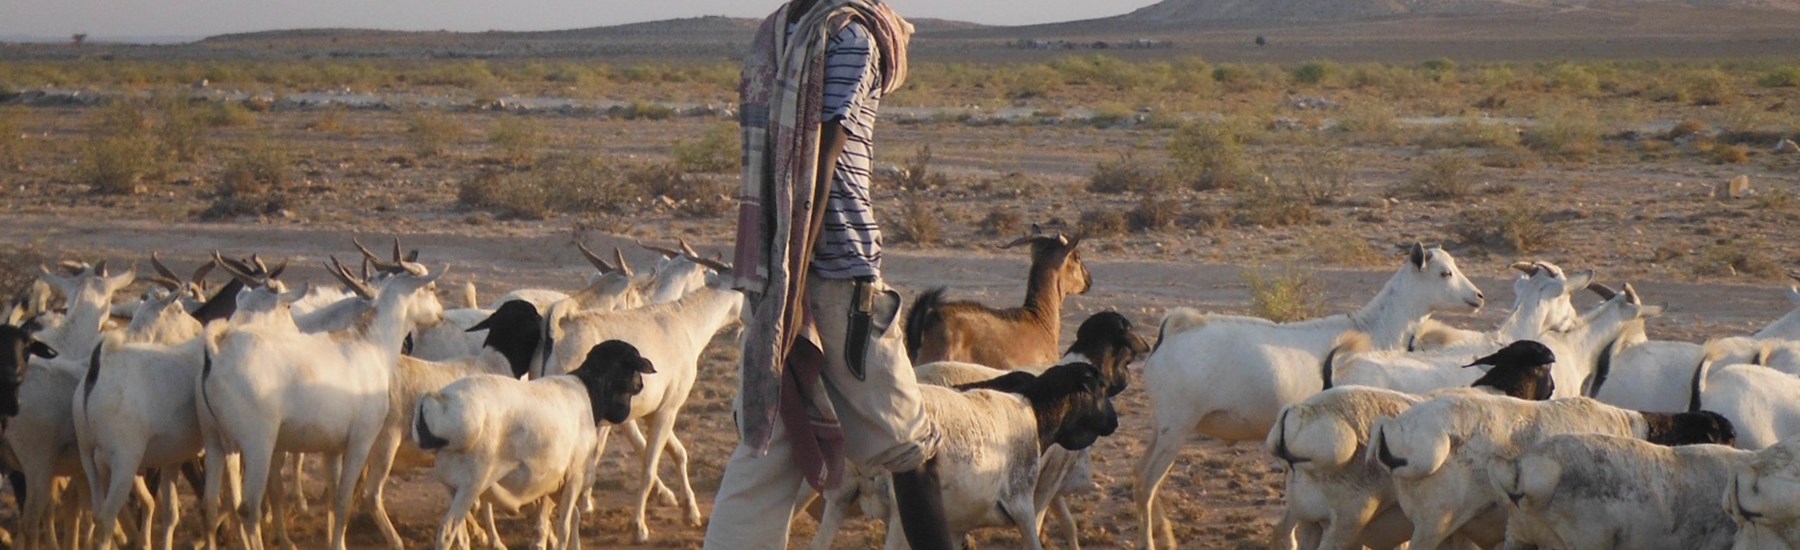 Man with sheep in Somliland, HALO Trust.